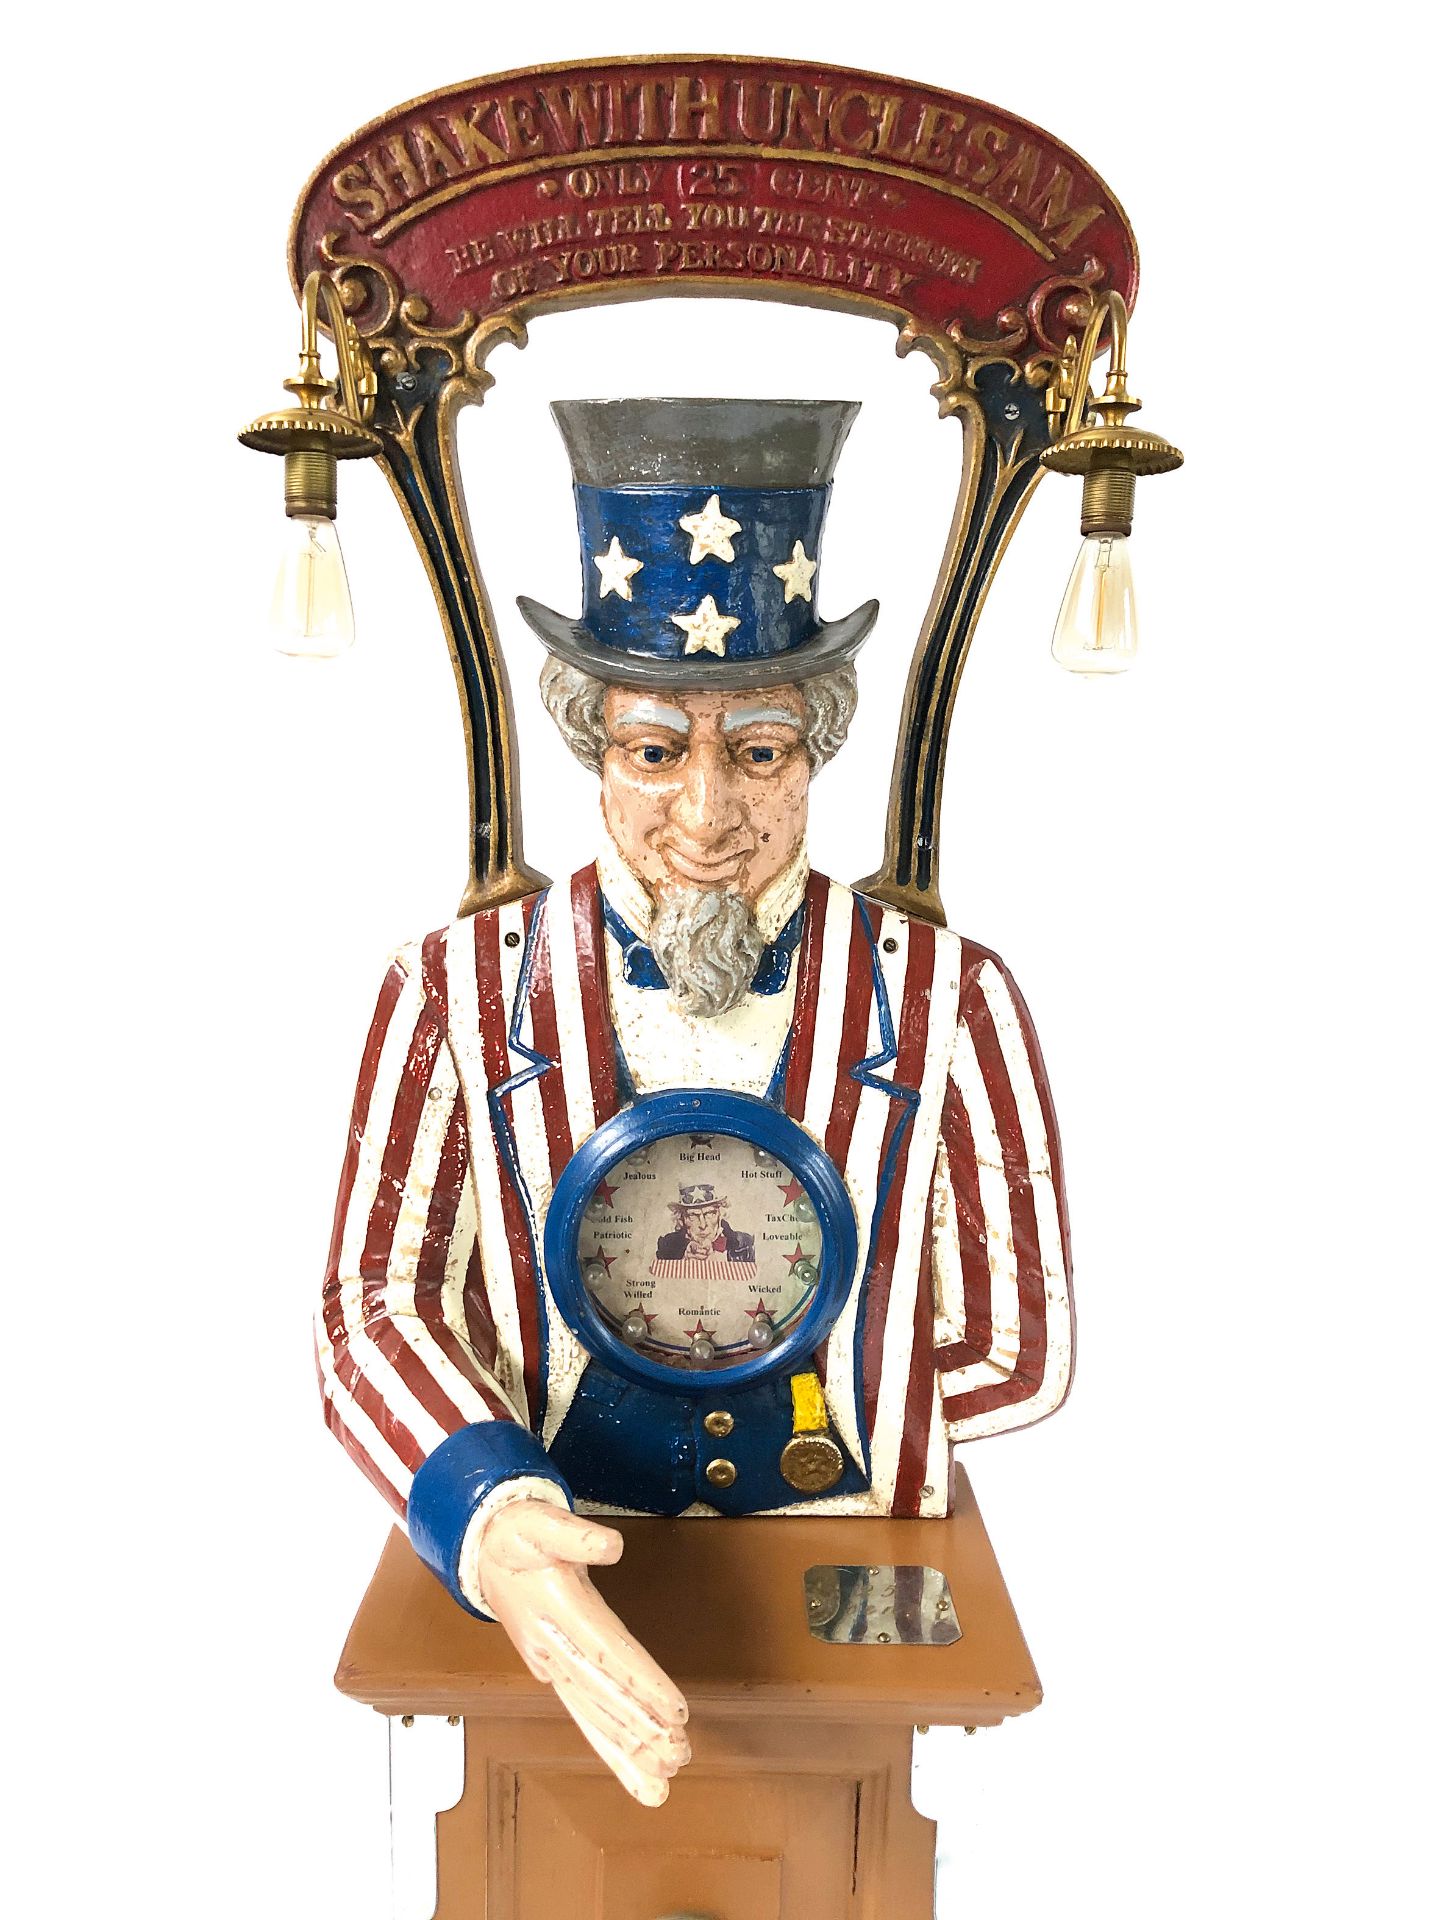 Restored Shake with Uncle Sam Grip Tester ca. 1940 - Image 3 of 5